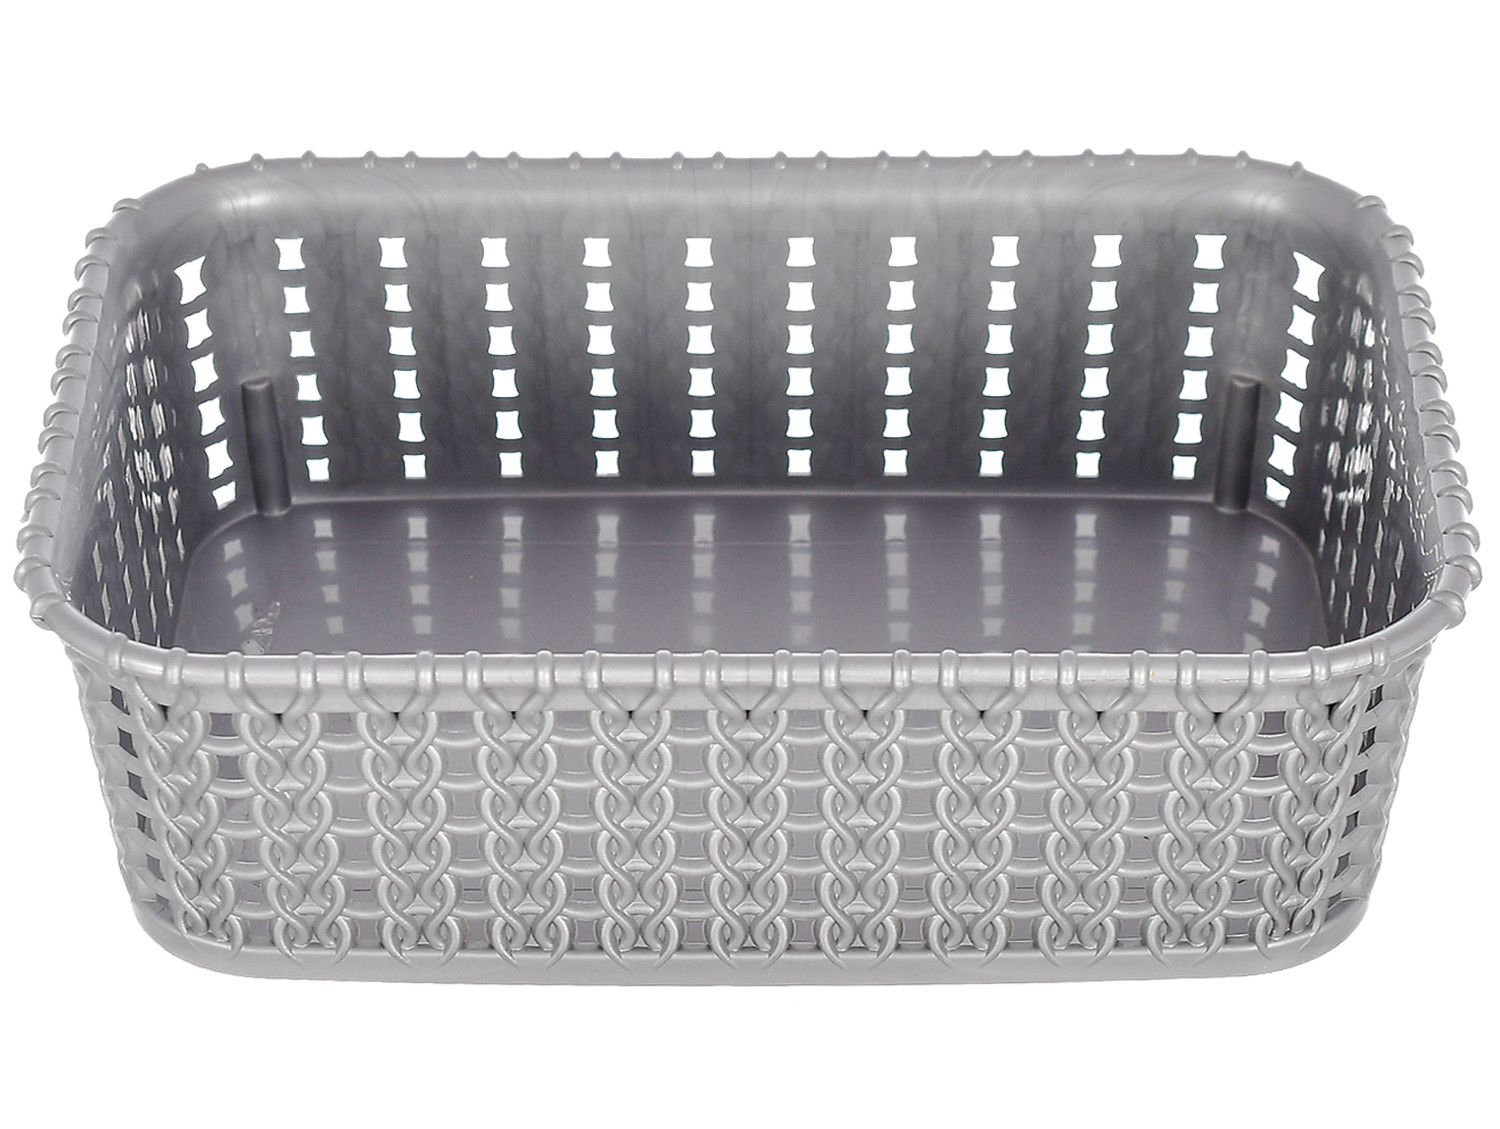 Kuber Industries Multiuses Small M 15 Plastic Tray/Basket/Organizer Without Lid-(Grey) -46KM0119